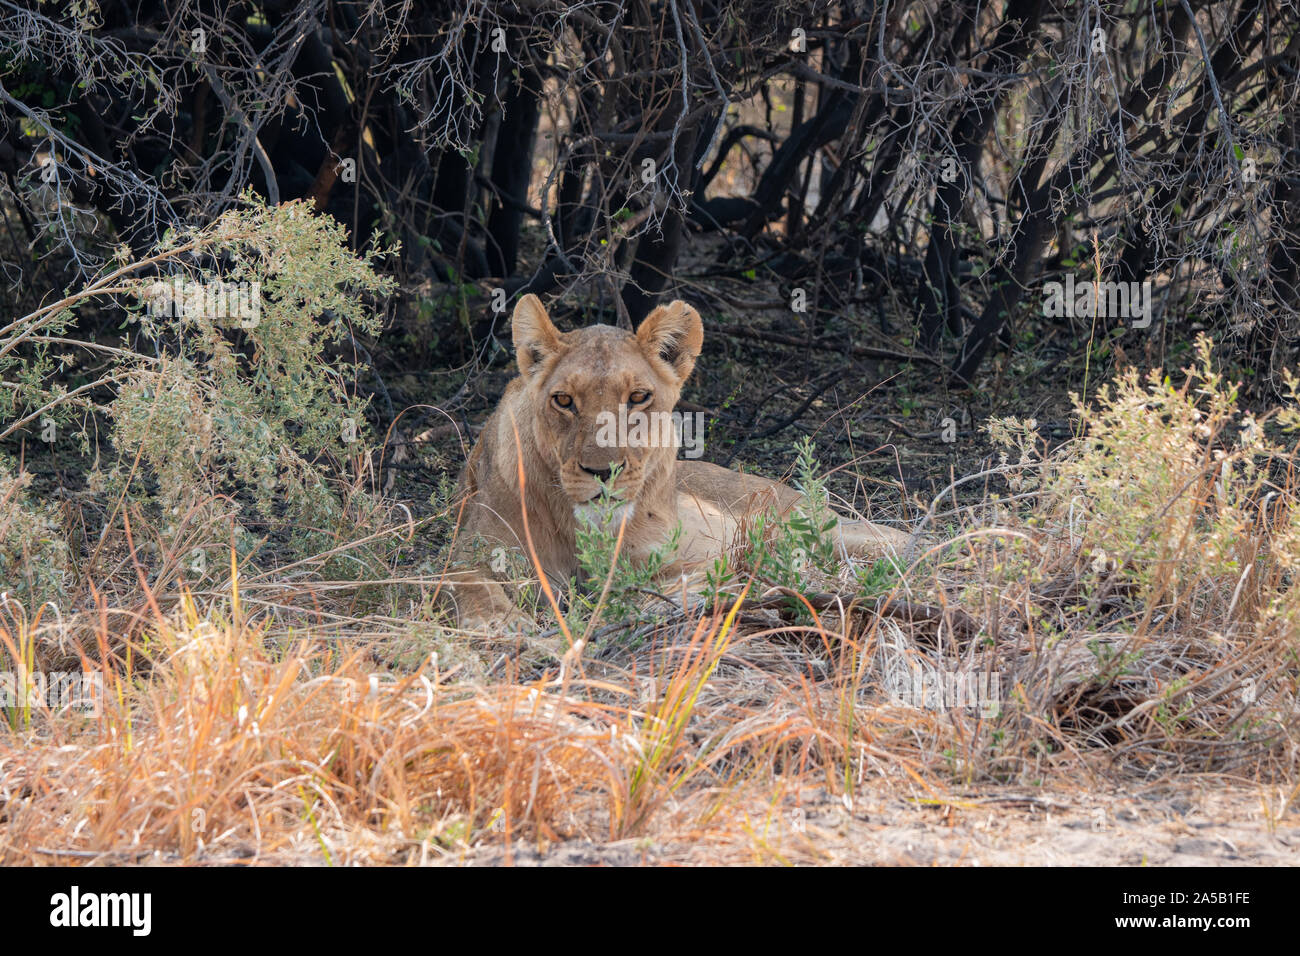 Female Lion - Lioness Resting, Lying on the Ground in the Shade of a Bush in Moremi Game Reserve, Okavango Delta, Botswana Stock Photo